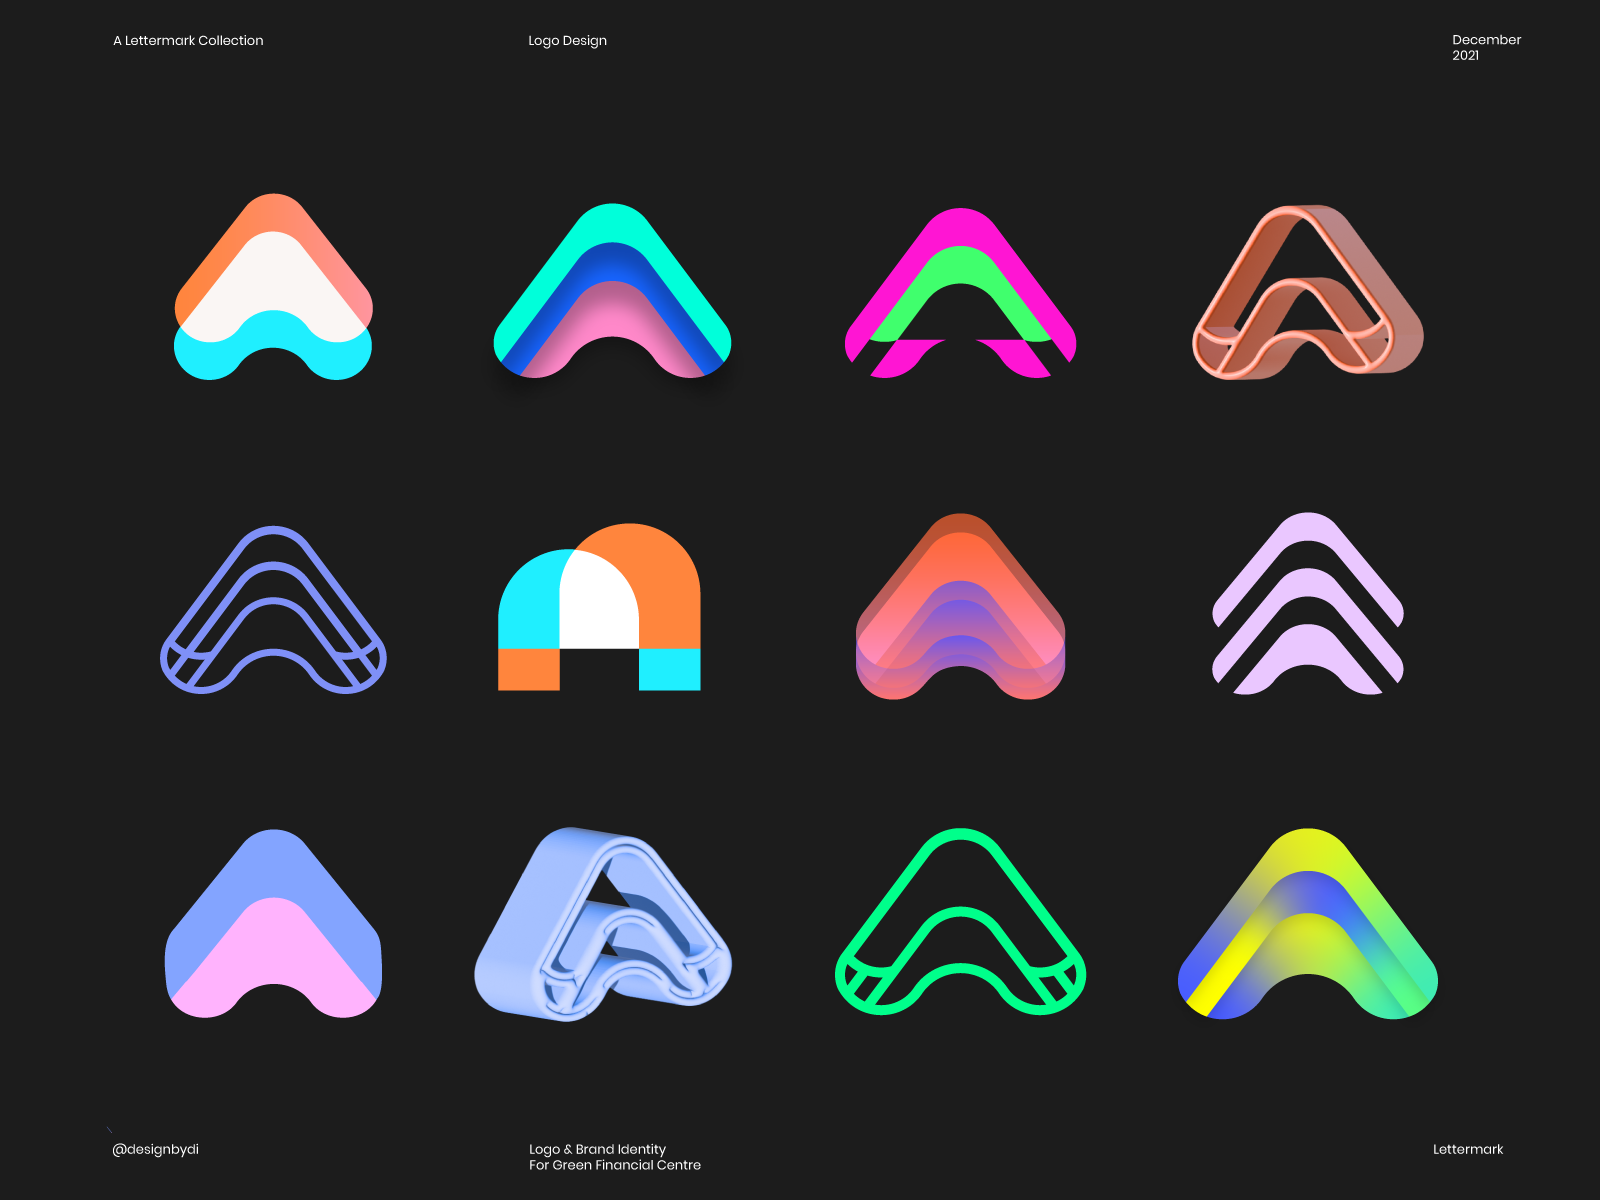 a-lettermark-logos-collection-by-designbydi-on-dribbble